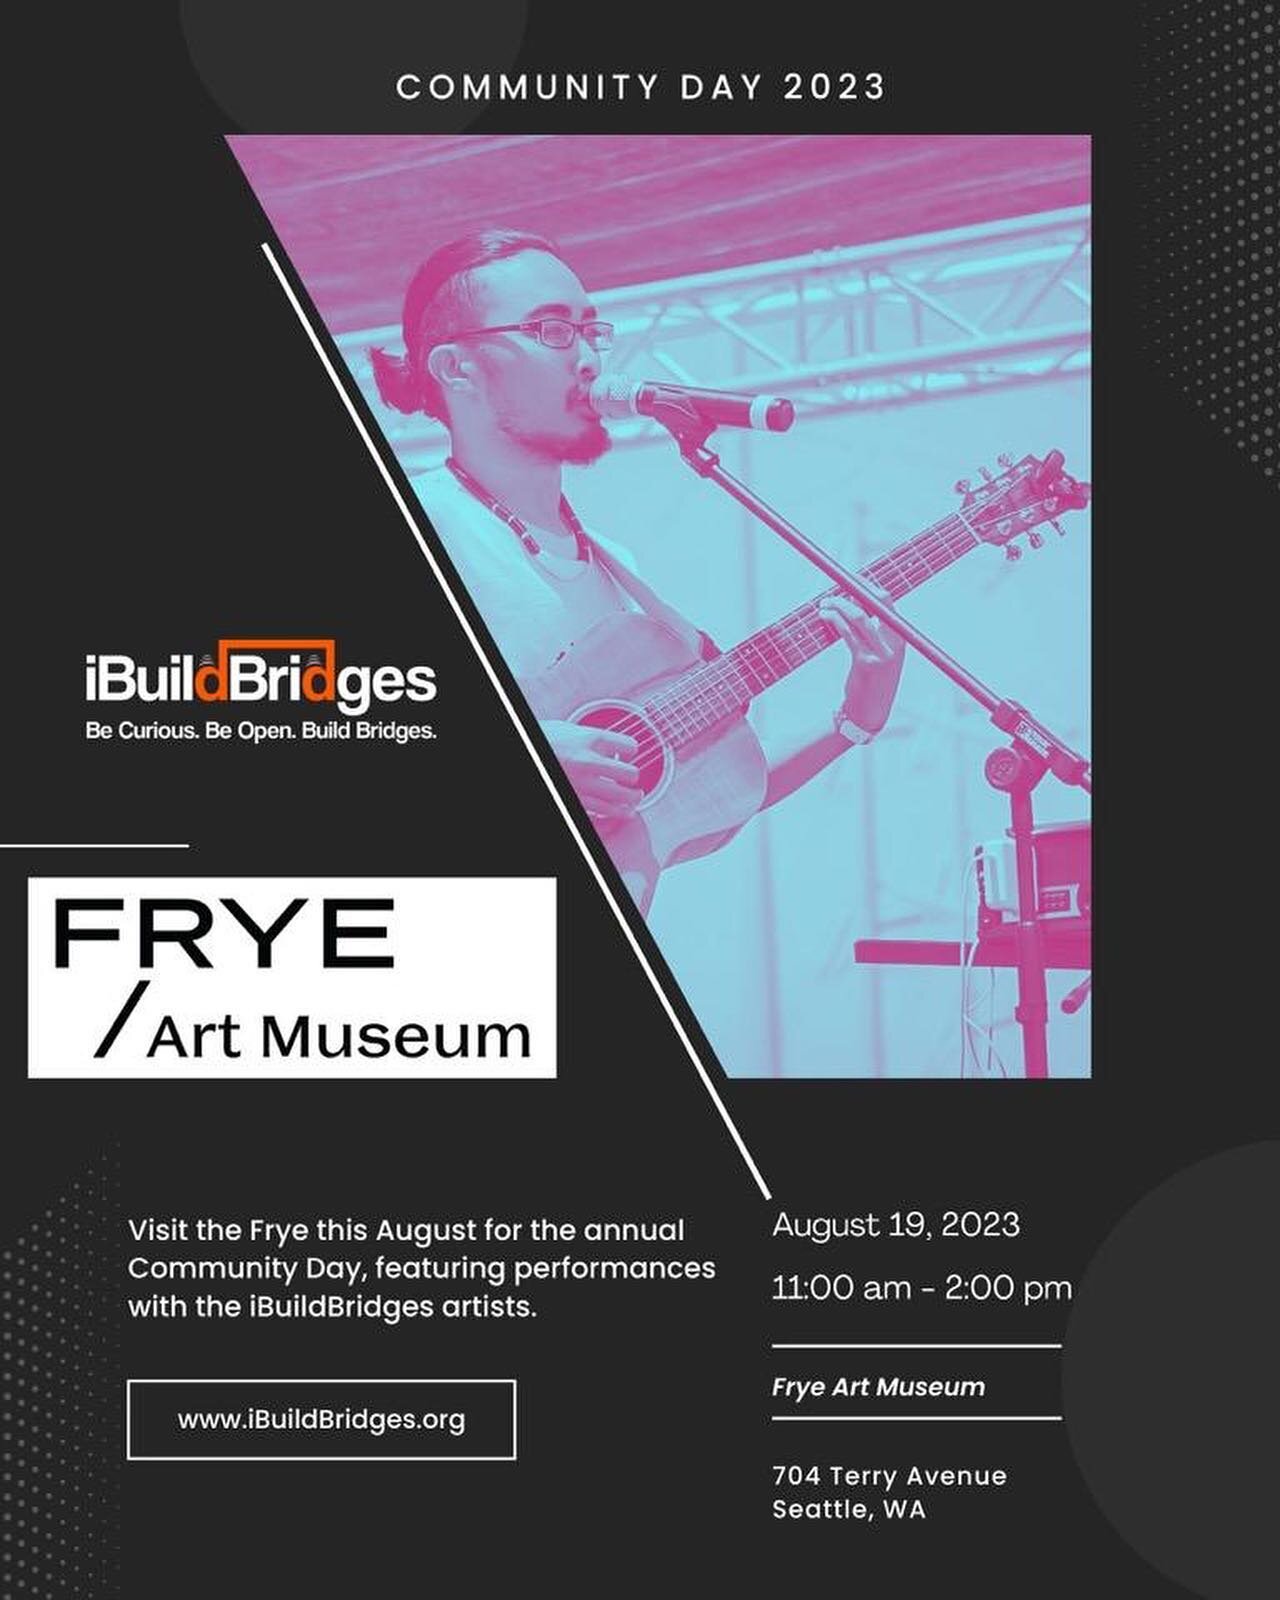 &quot;Join us for Community Day on Saturday, August 19th, at the @fryeartmuseum 

You won't want to miss iBuildBridges' three performances at 11:30 am-12 pm, 12:30-1 pm, and 1:15-1:45 pm. This exciting event is perfect for families and friends of all